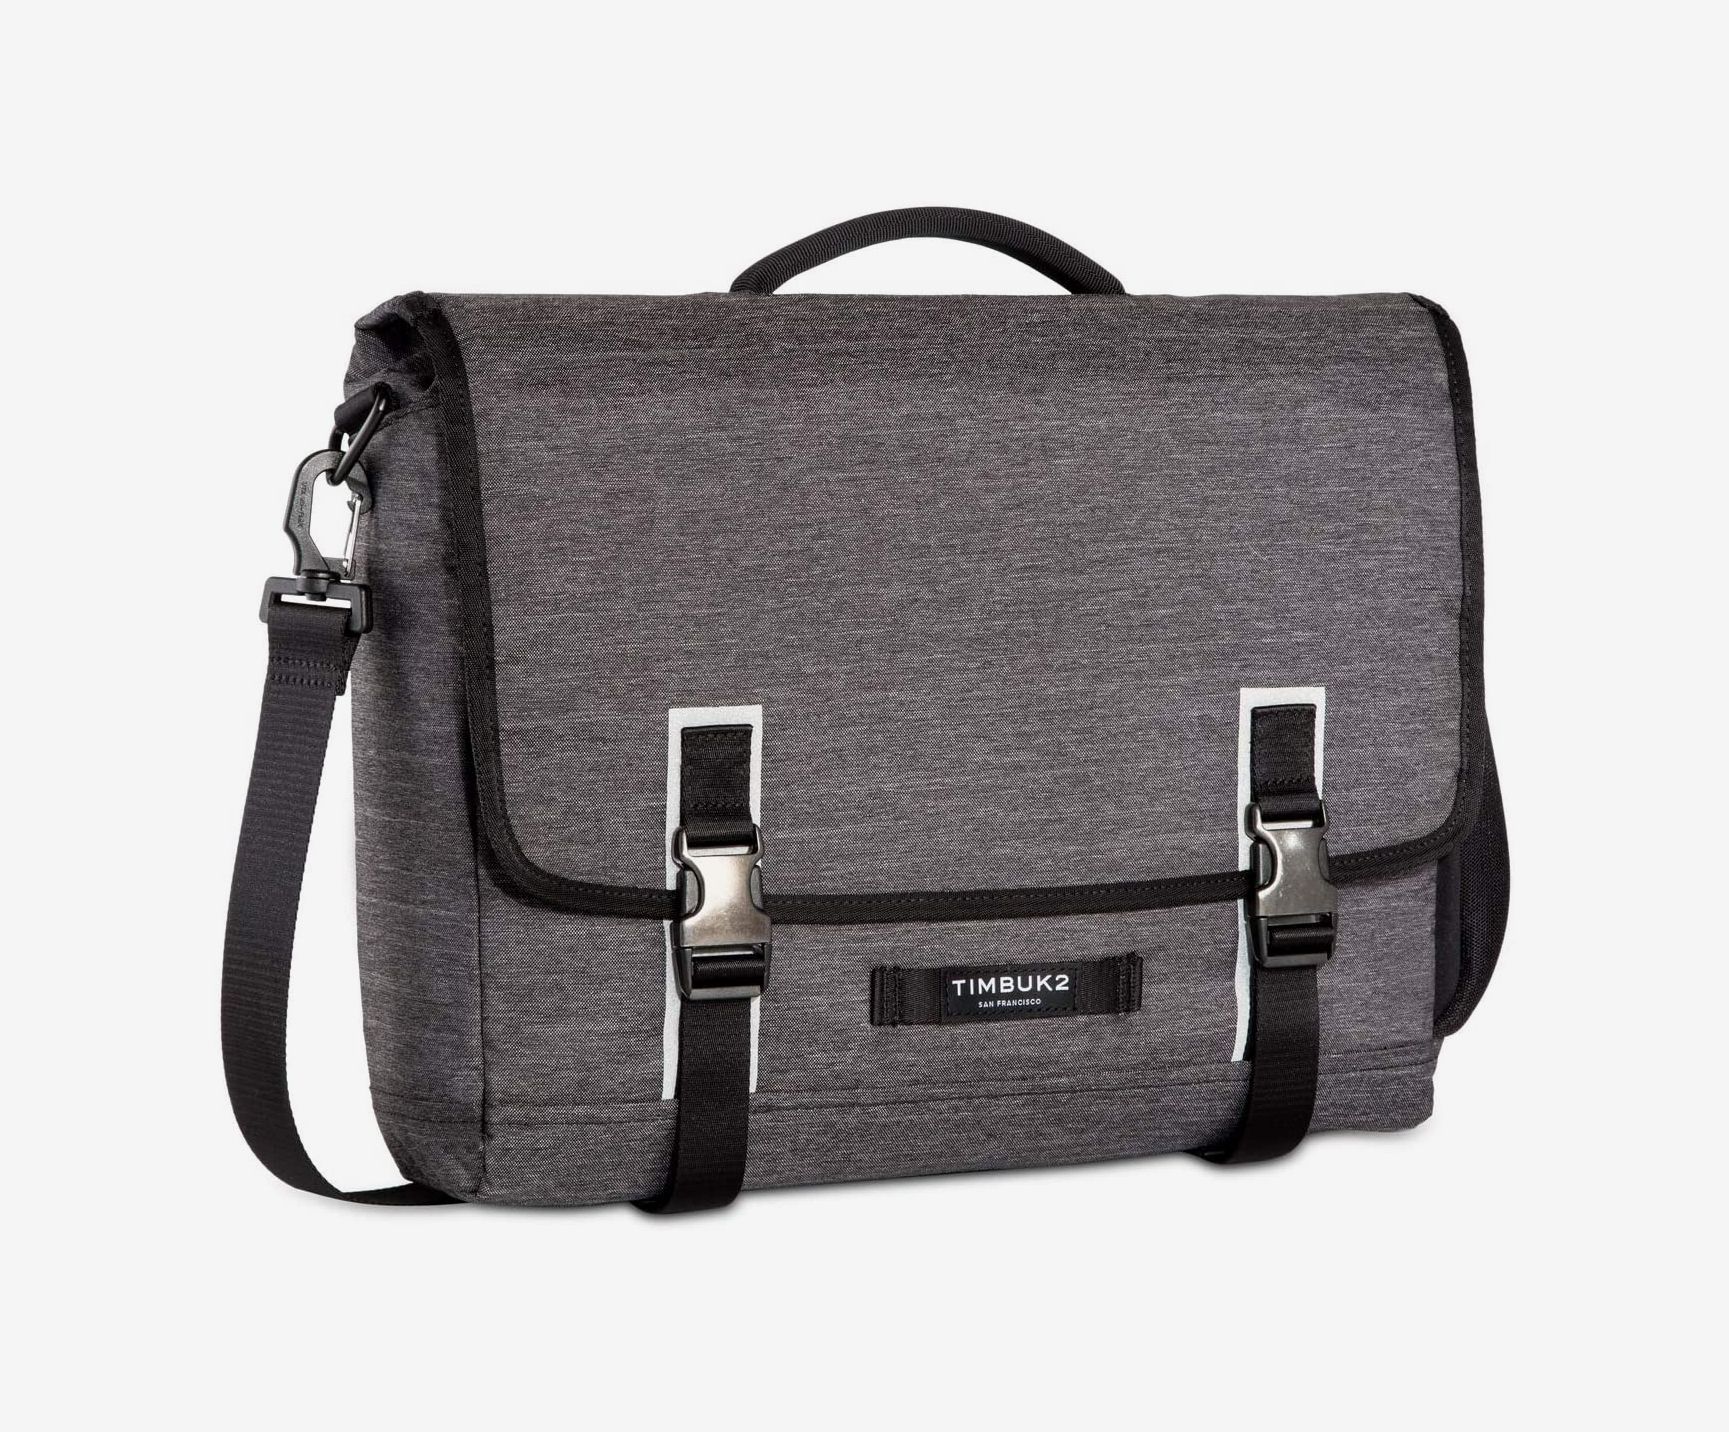 New Timbuk2 messenger bags feature internal chargers